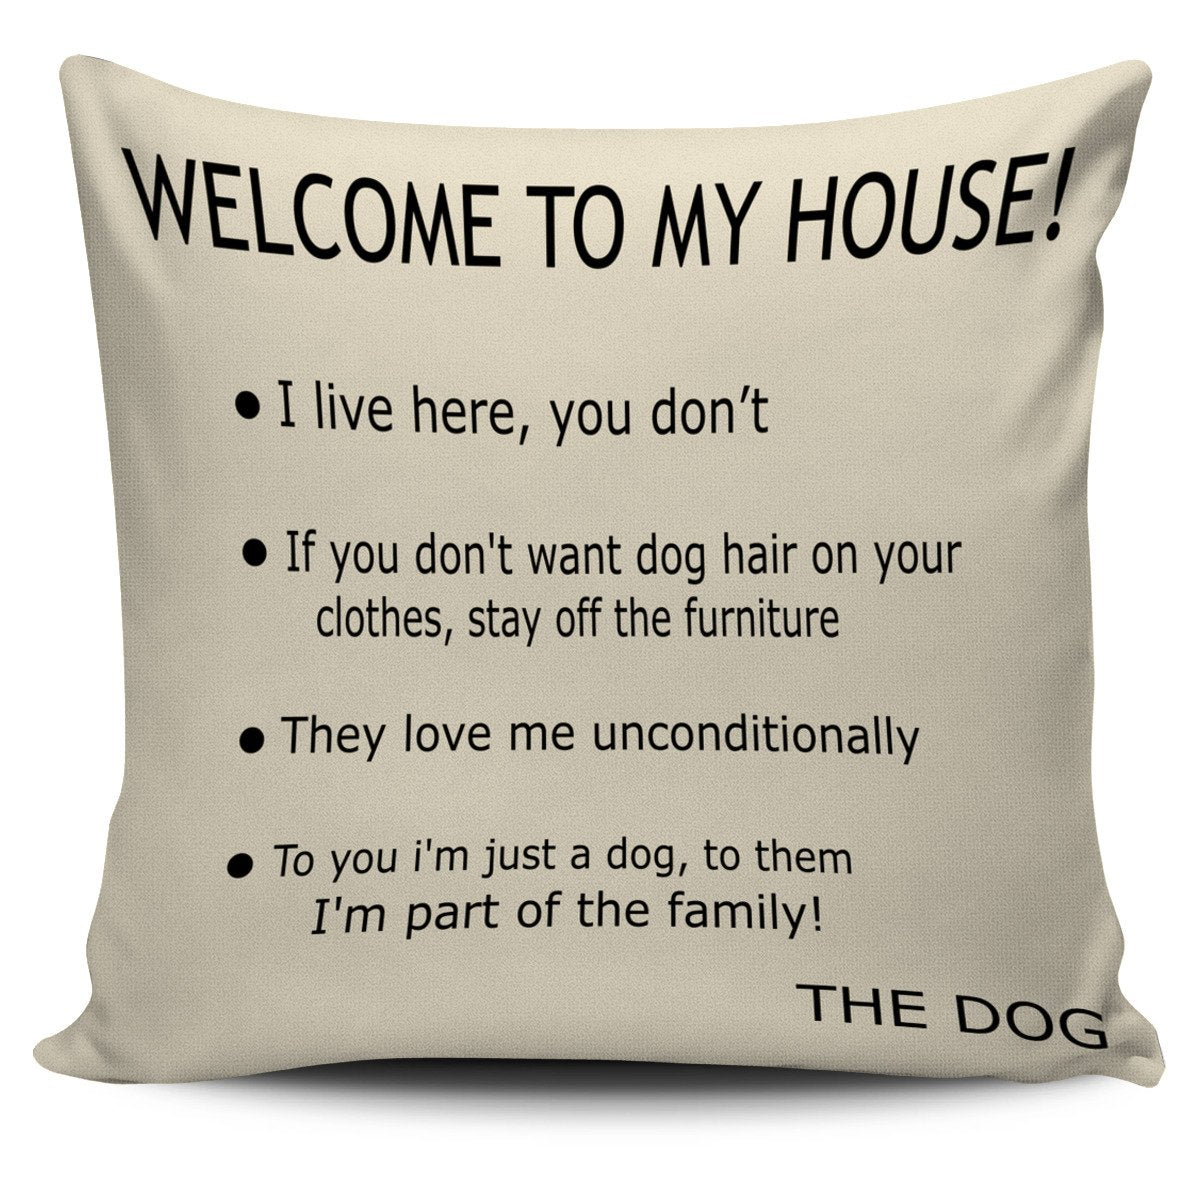 Dog's house Pillow Cover-DogsTailCircle